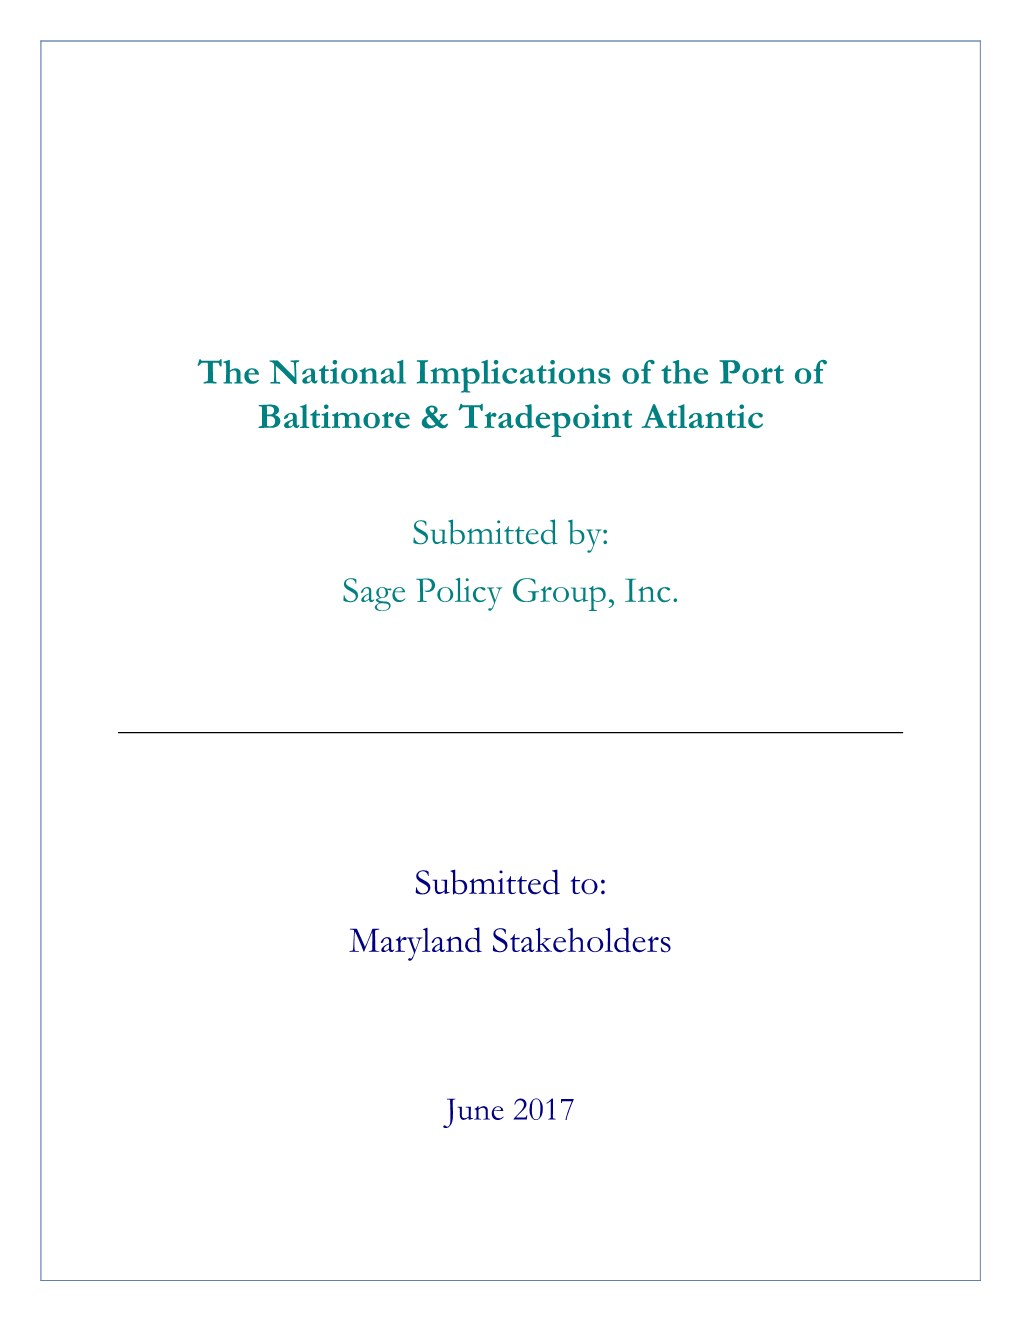 The National Implications of the Port of Baltimore & Tradepoint Atlantic Submitted By: Sage Policy Group, Inc. Submitted